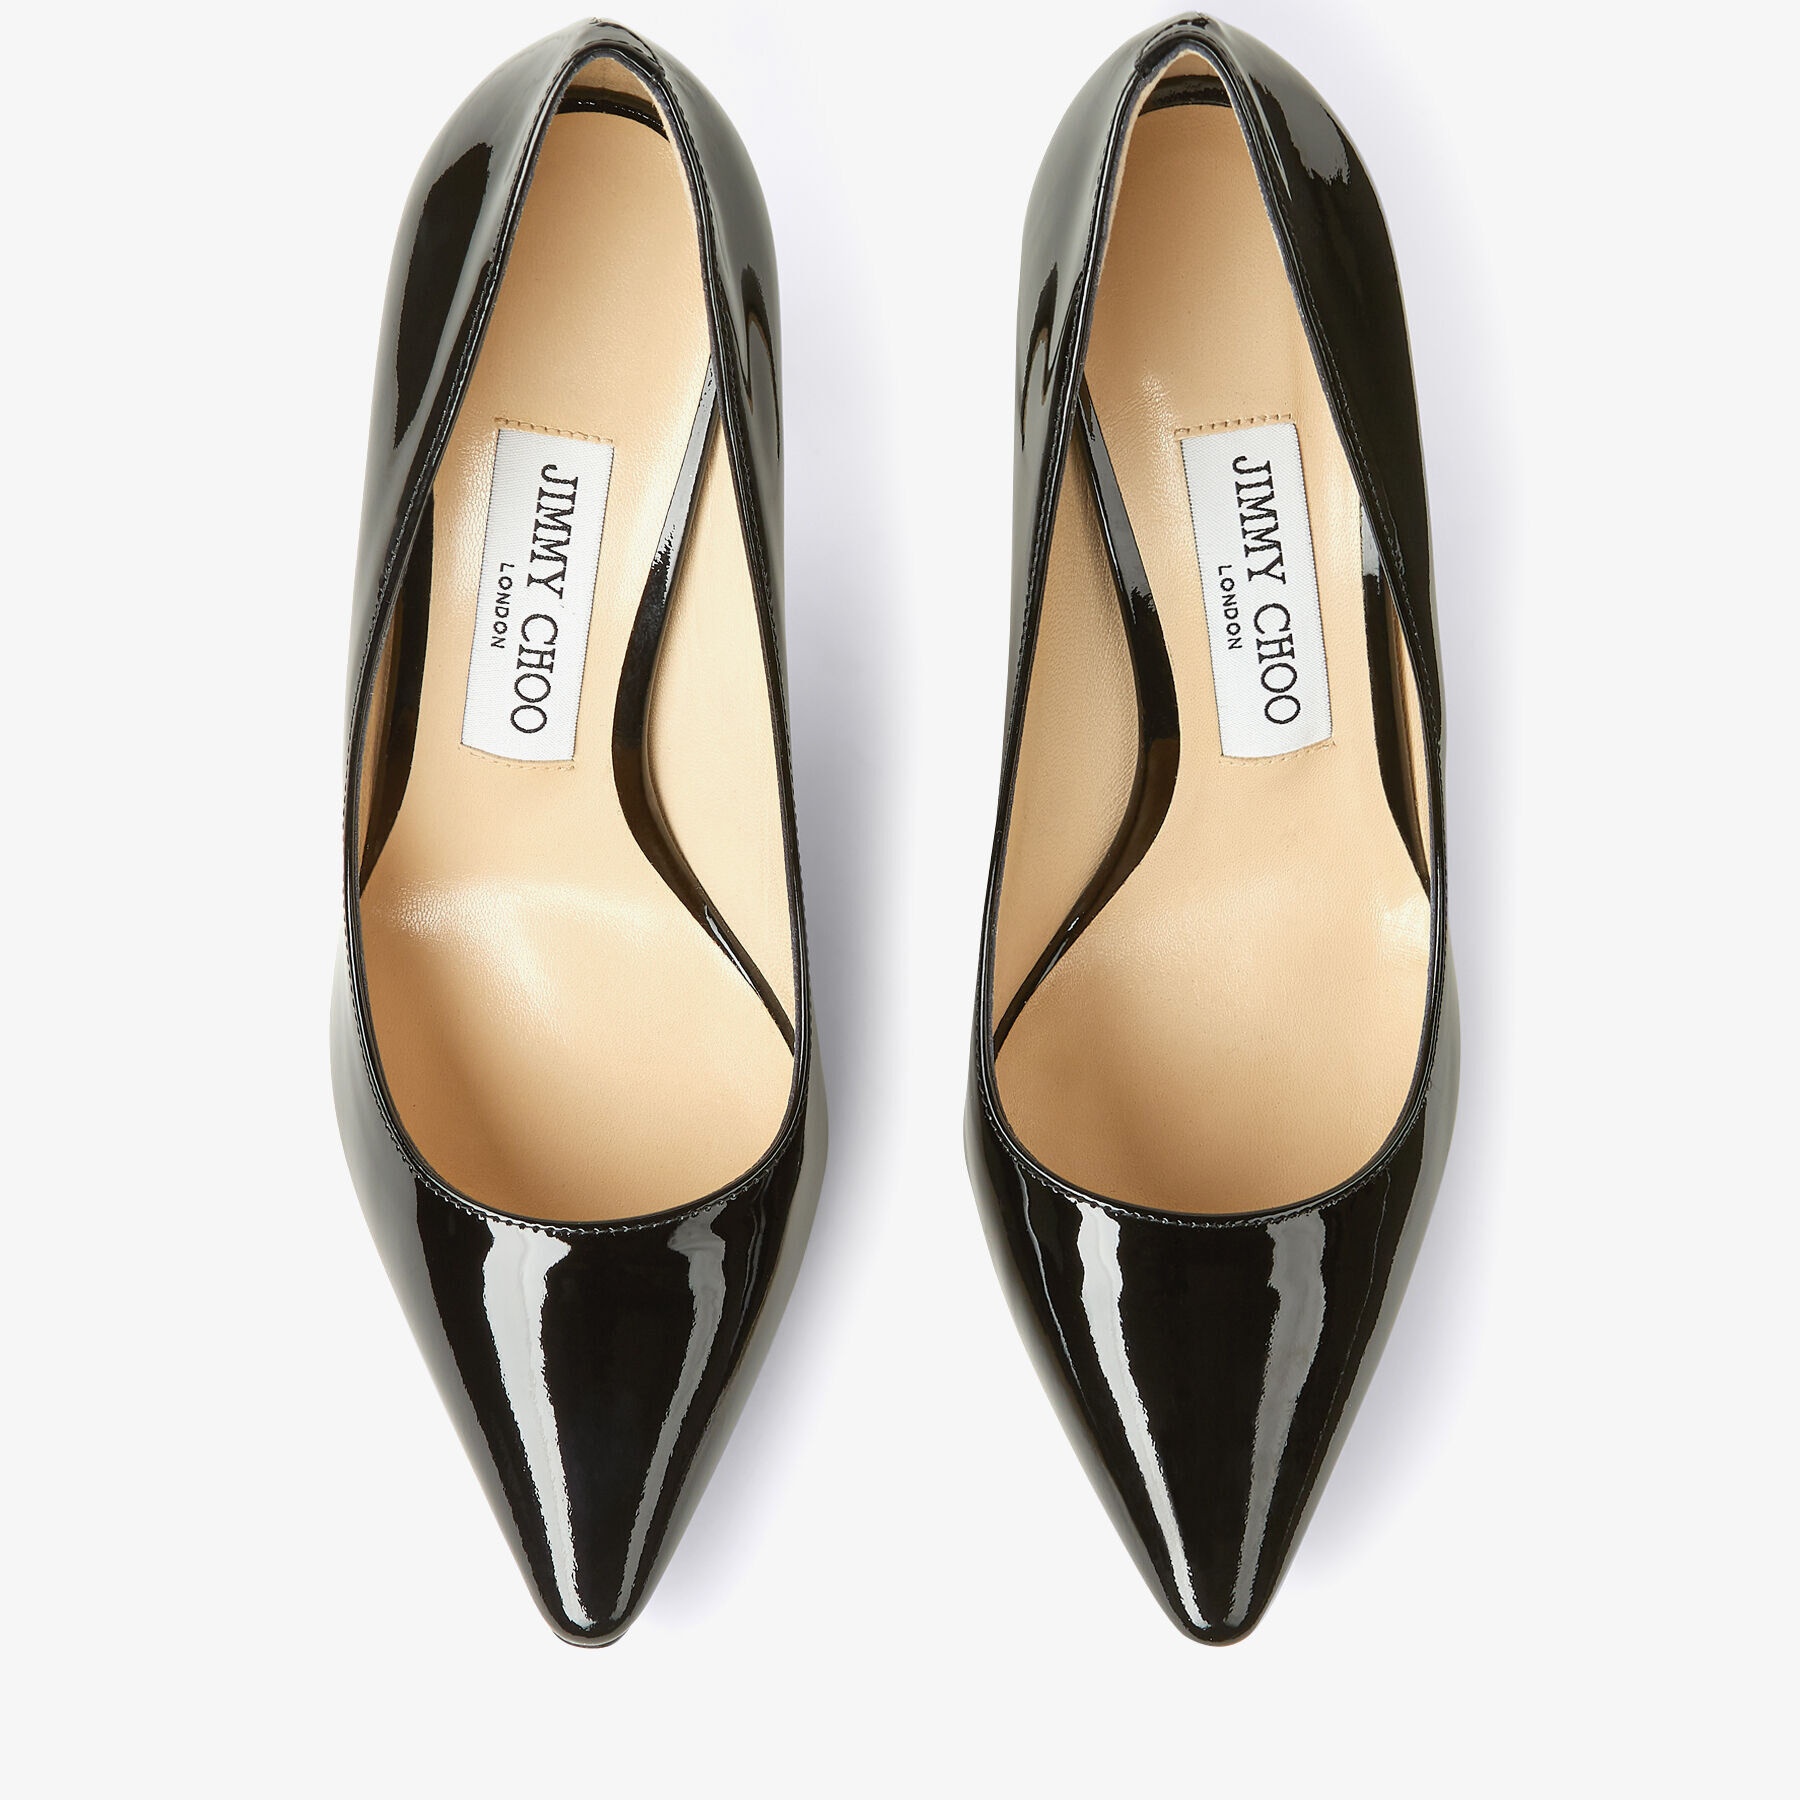 Romy 100
Black Patent Leather Pointy Toe Pumps - 5